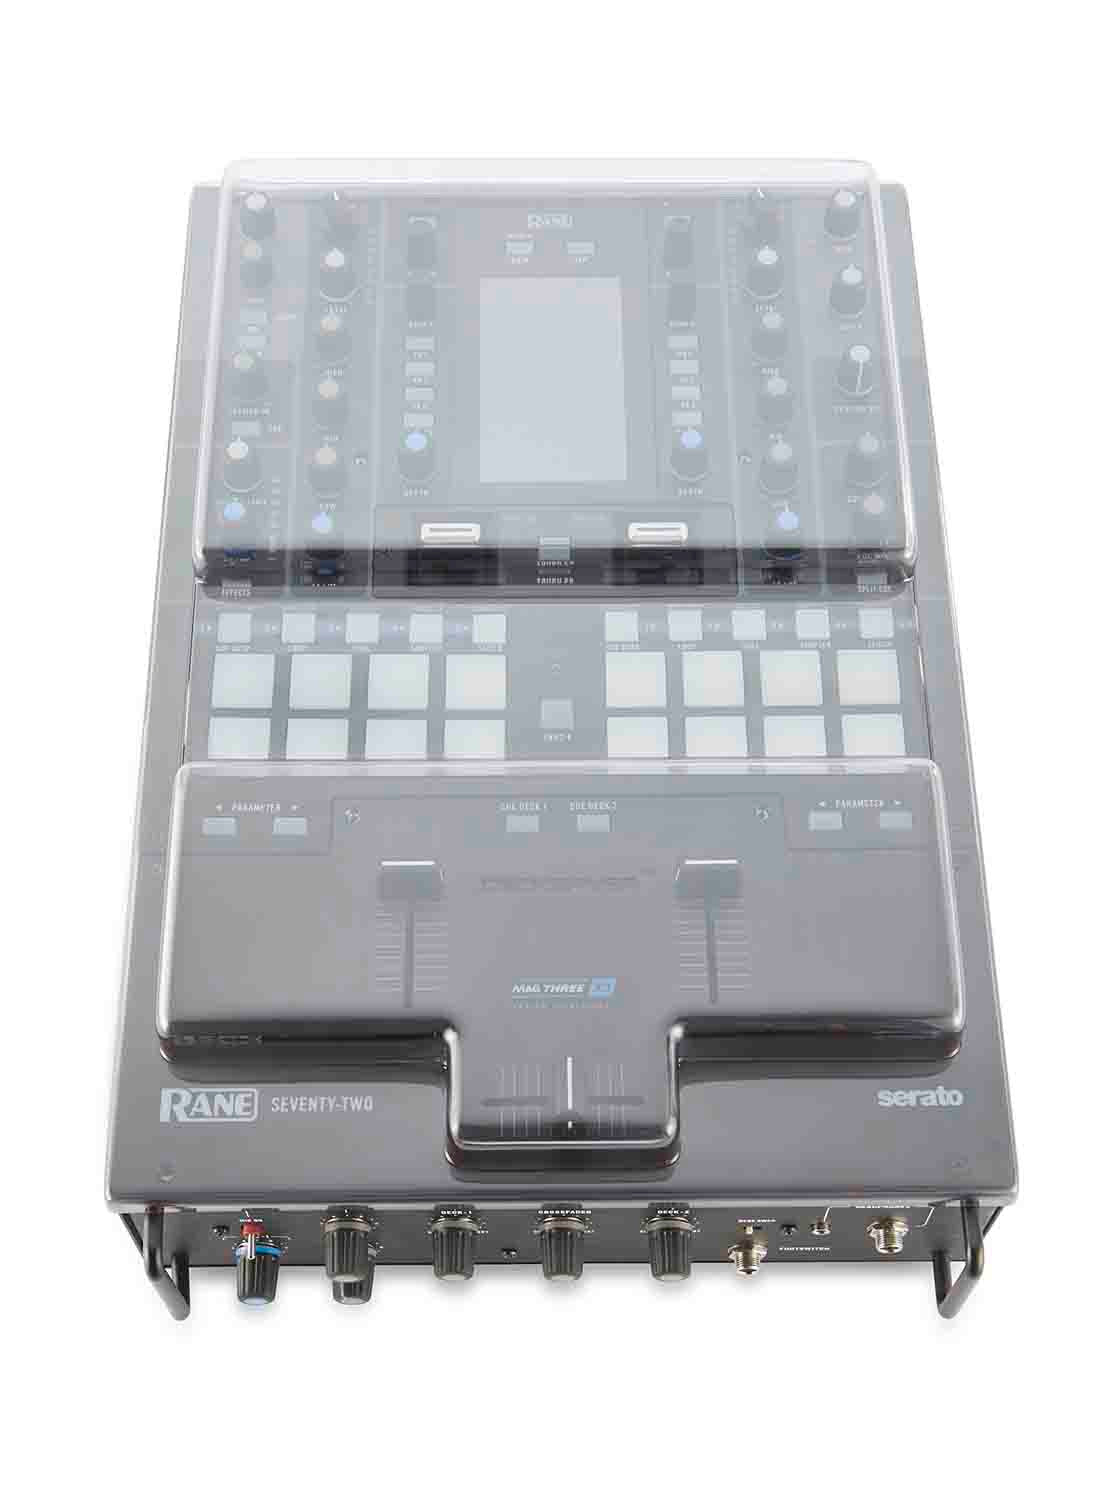 B-Stock: Decksaver DS-PC-RANE72 Protection Cover for Rane Seventy-Two / Seventy-Two MK2 Mixer - Hollywood DJ